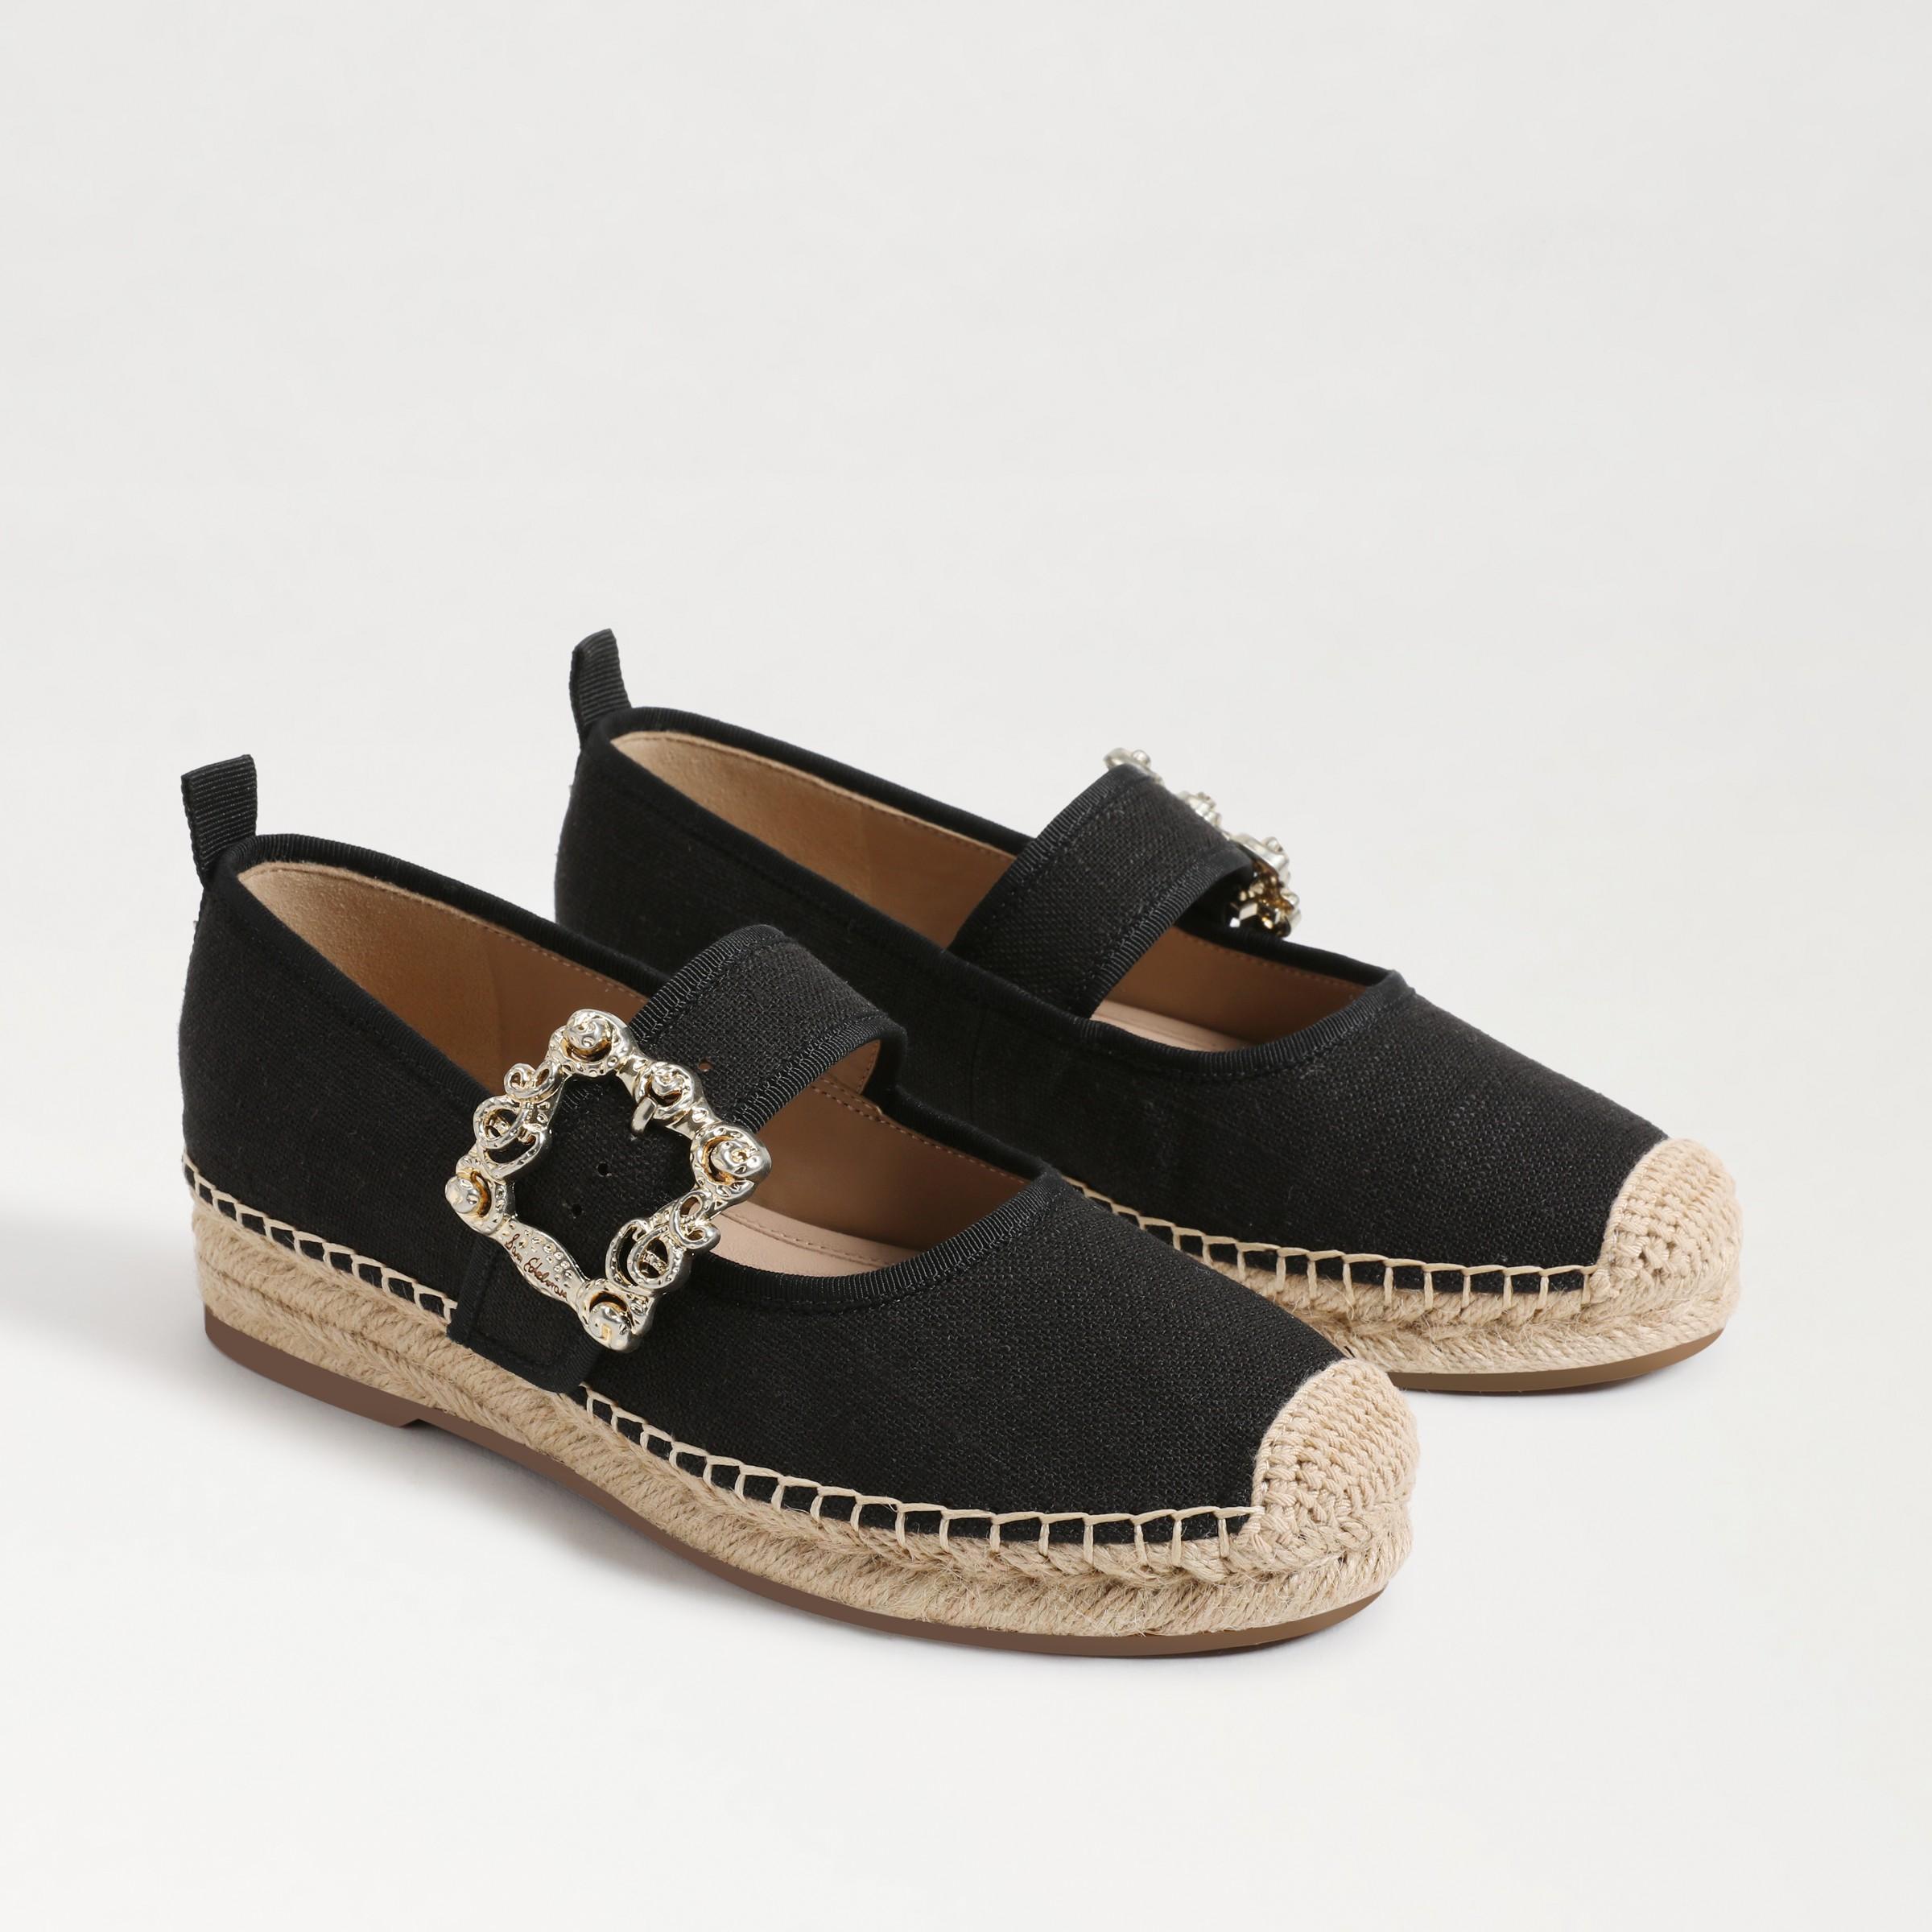 Sam Edelman Maddy Linen Mary Jane Espadrille Loafers Product Image